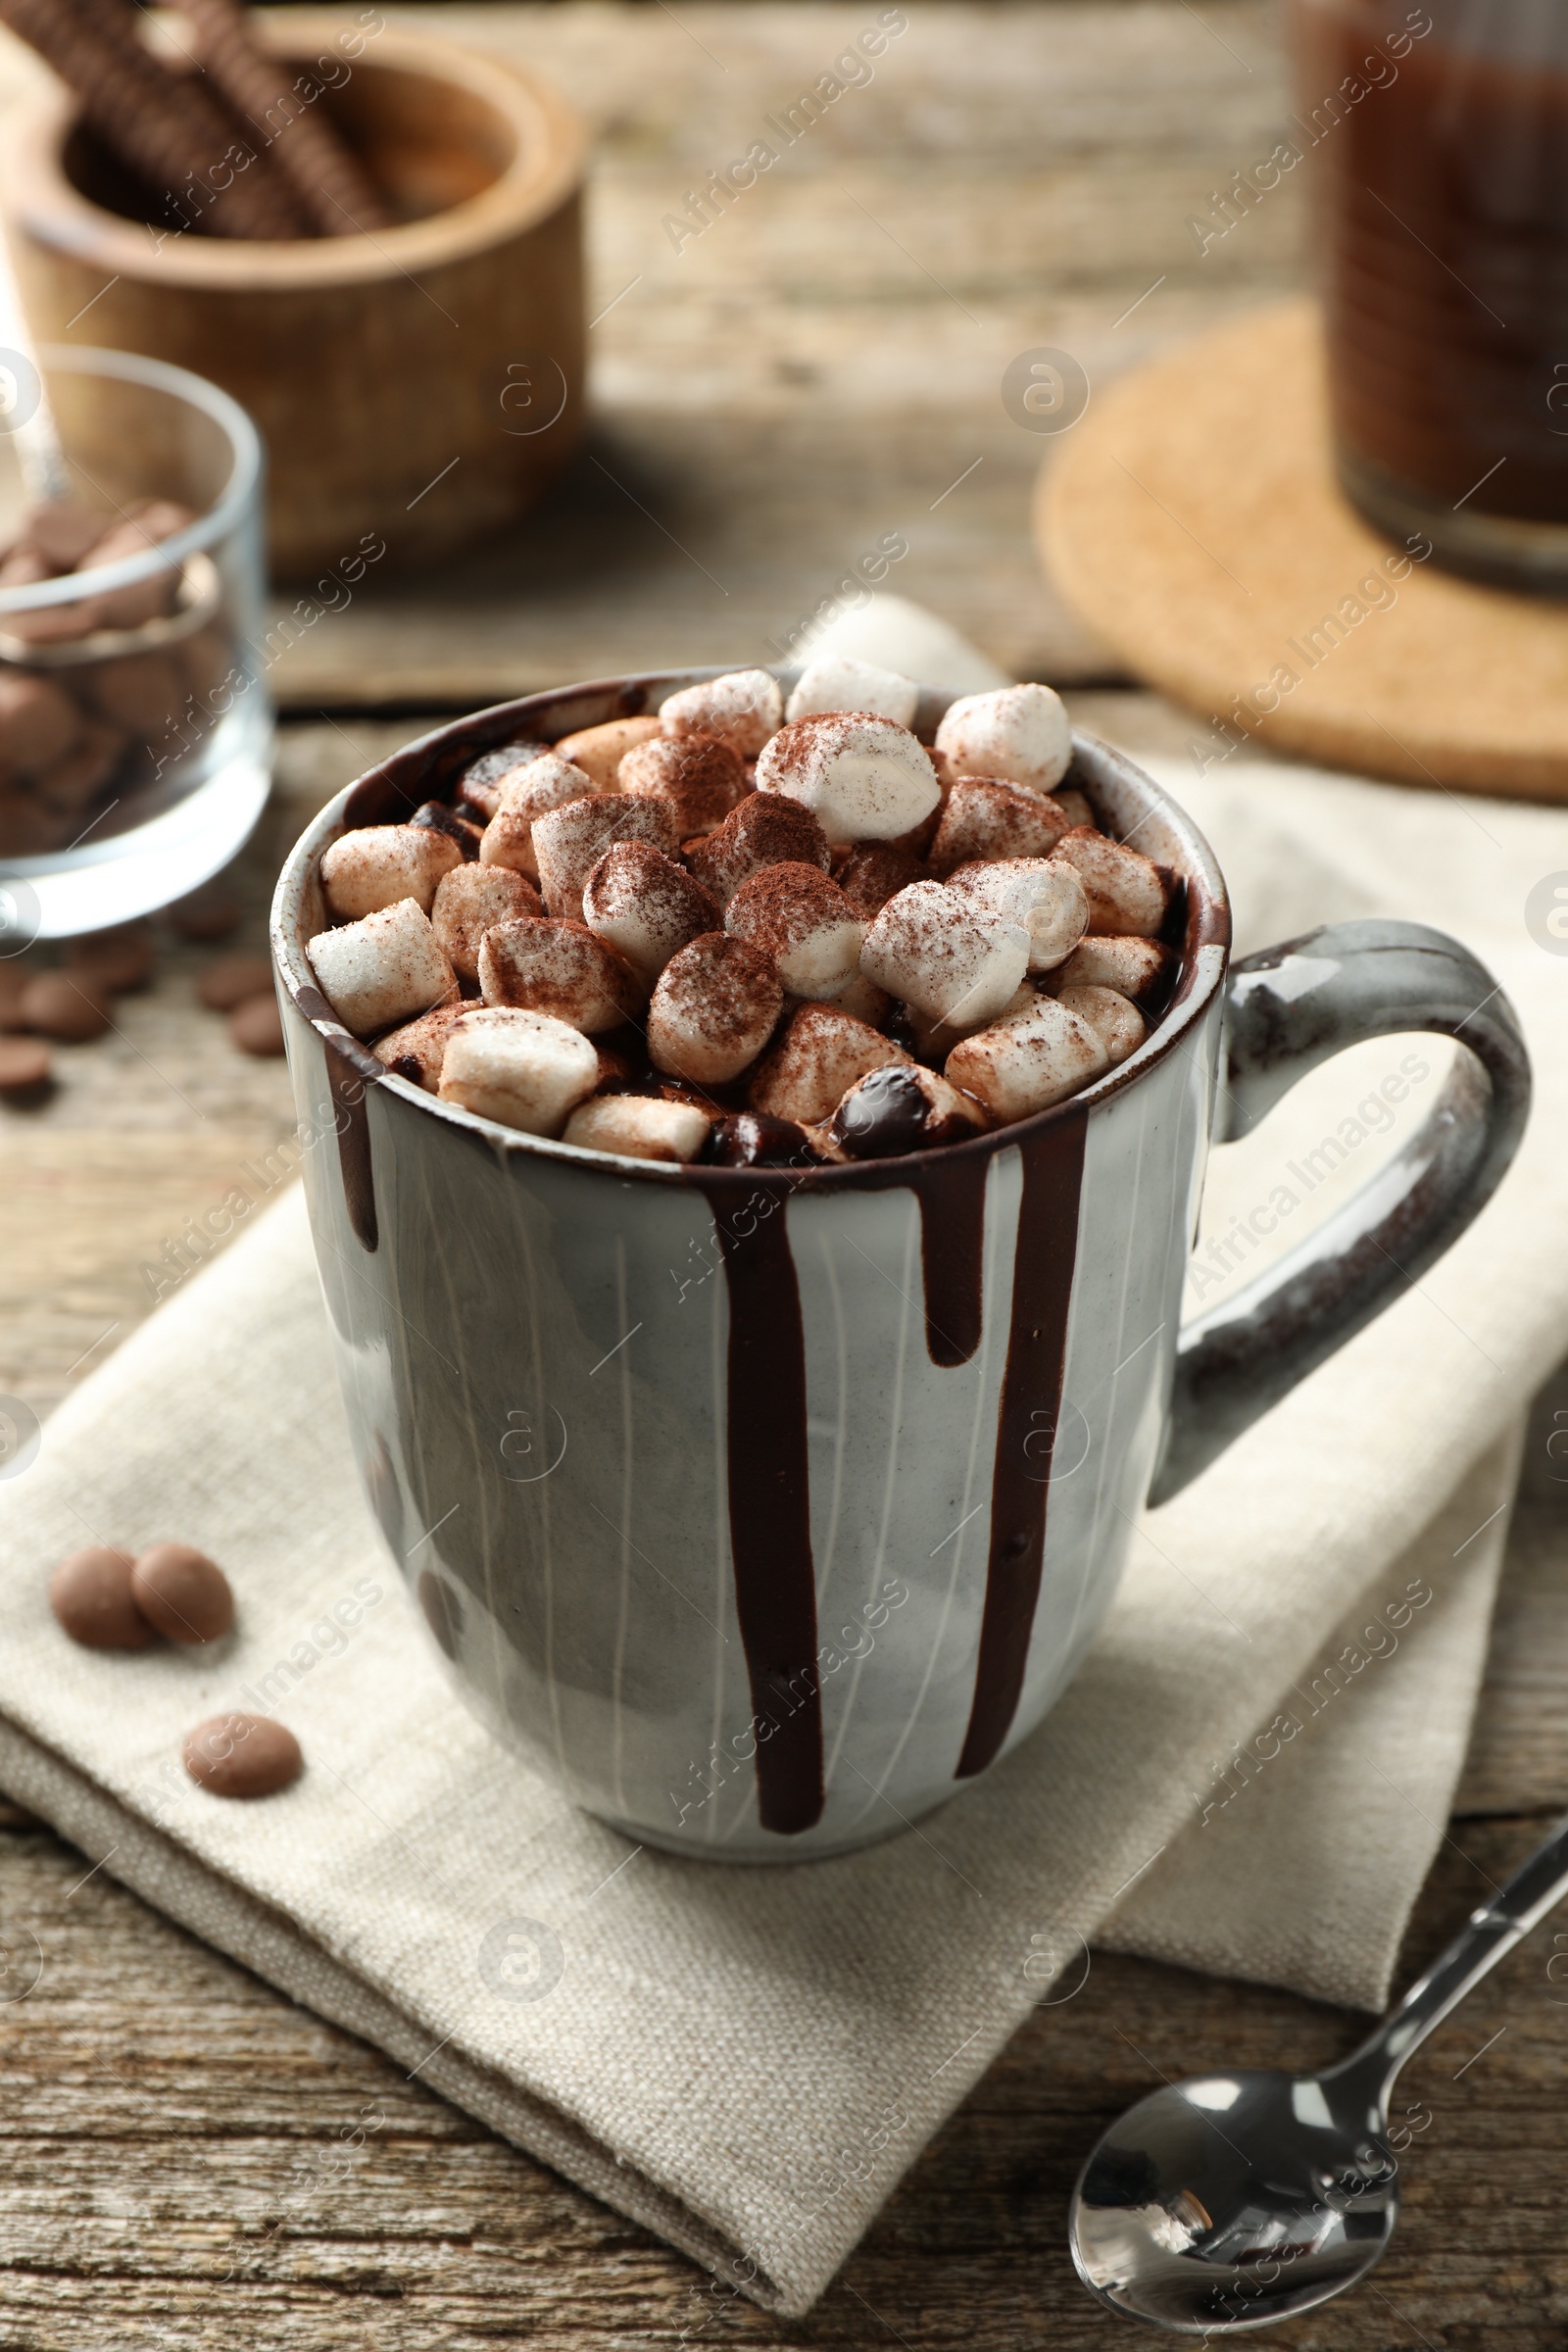 Photo of Delicious hot chocolate with marshmallows and cocoa powder in cup on wooden table